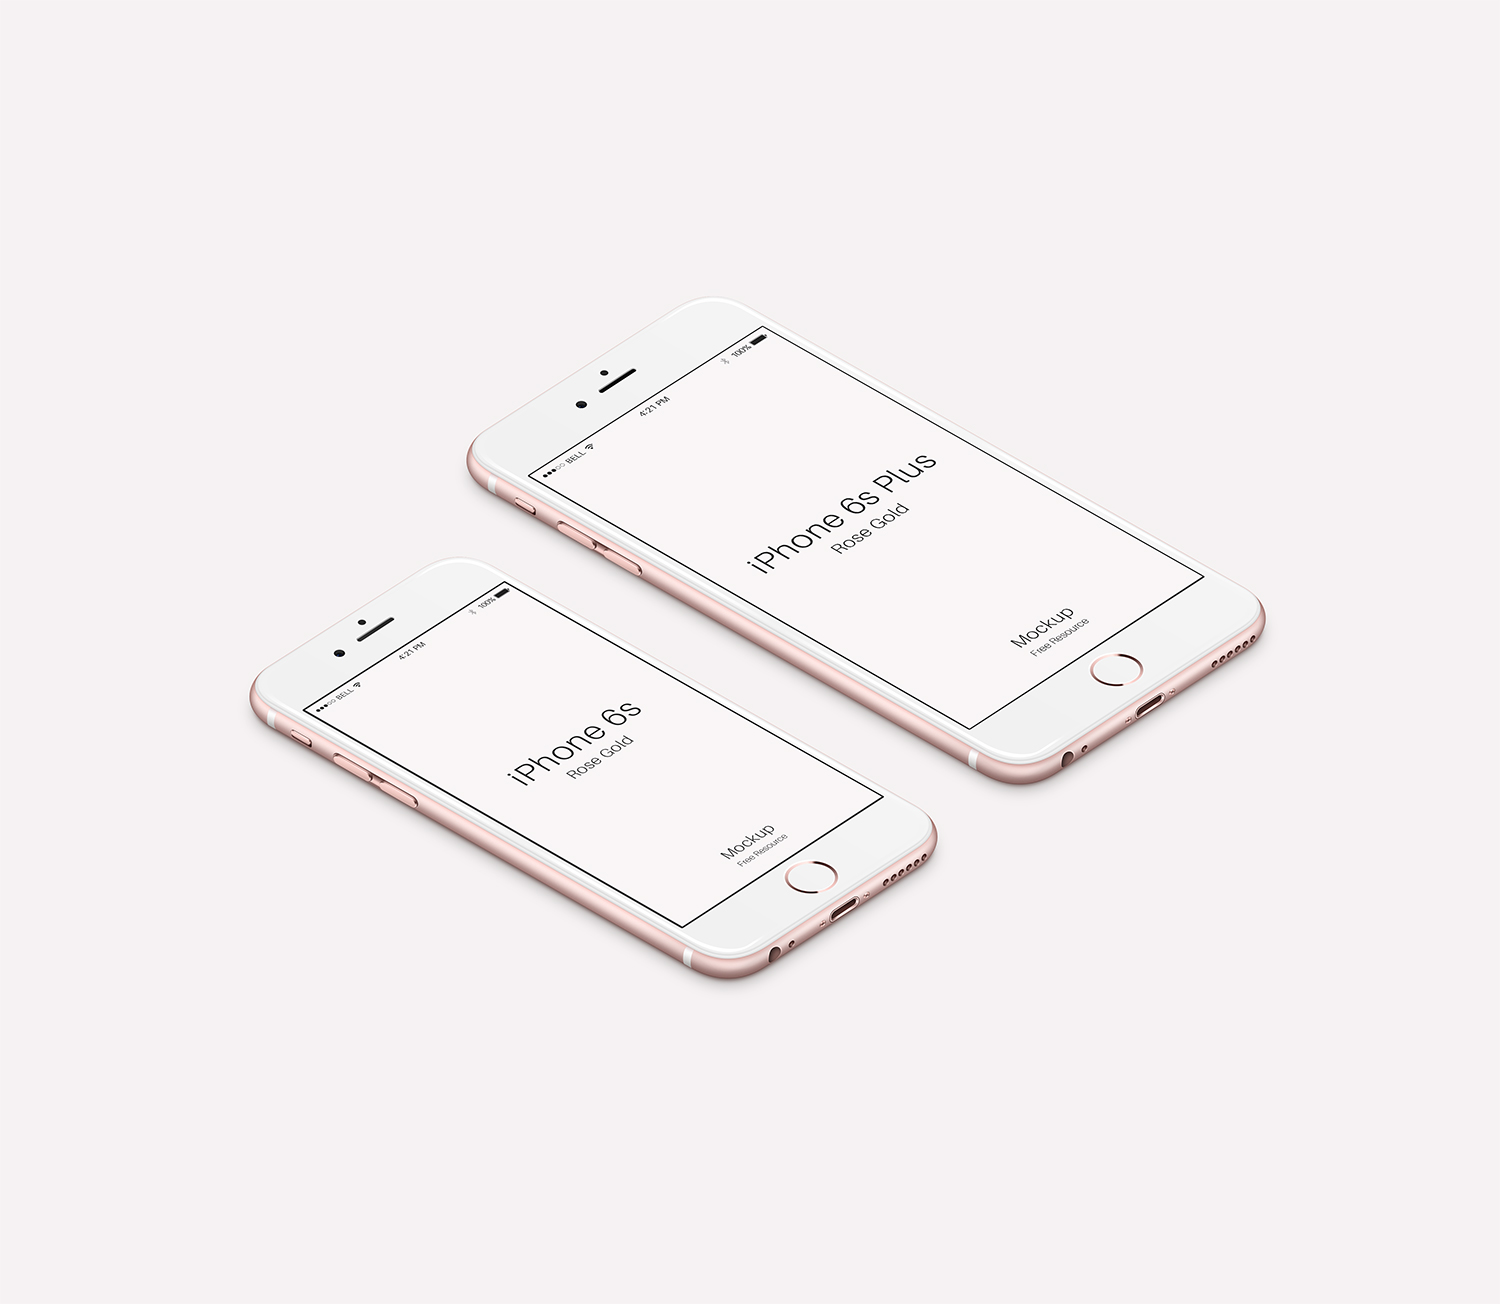 Clean iPhone 6s/6s Plus Rose Gold Mockups